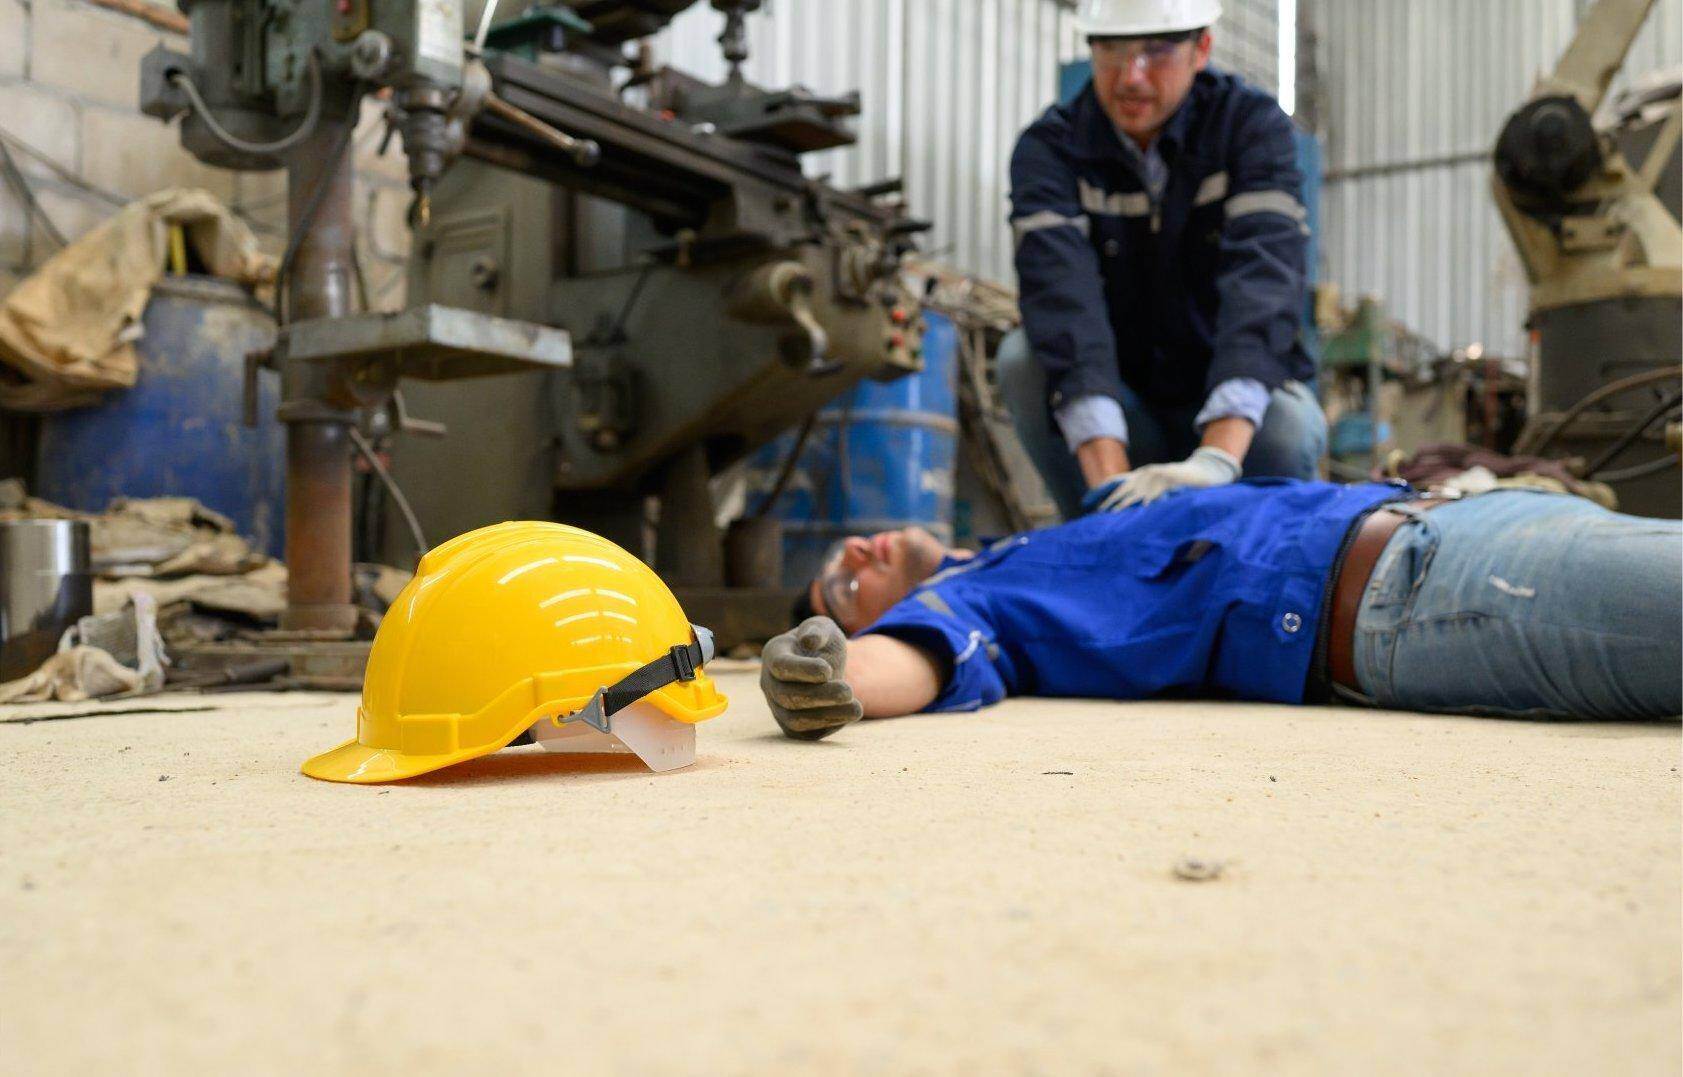 An unconscious man who has been injured on the job who will file for workers compensation in Milton, Georgia